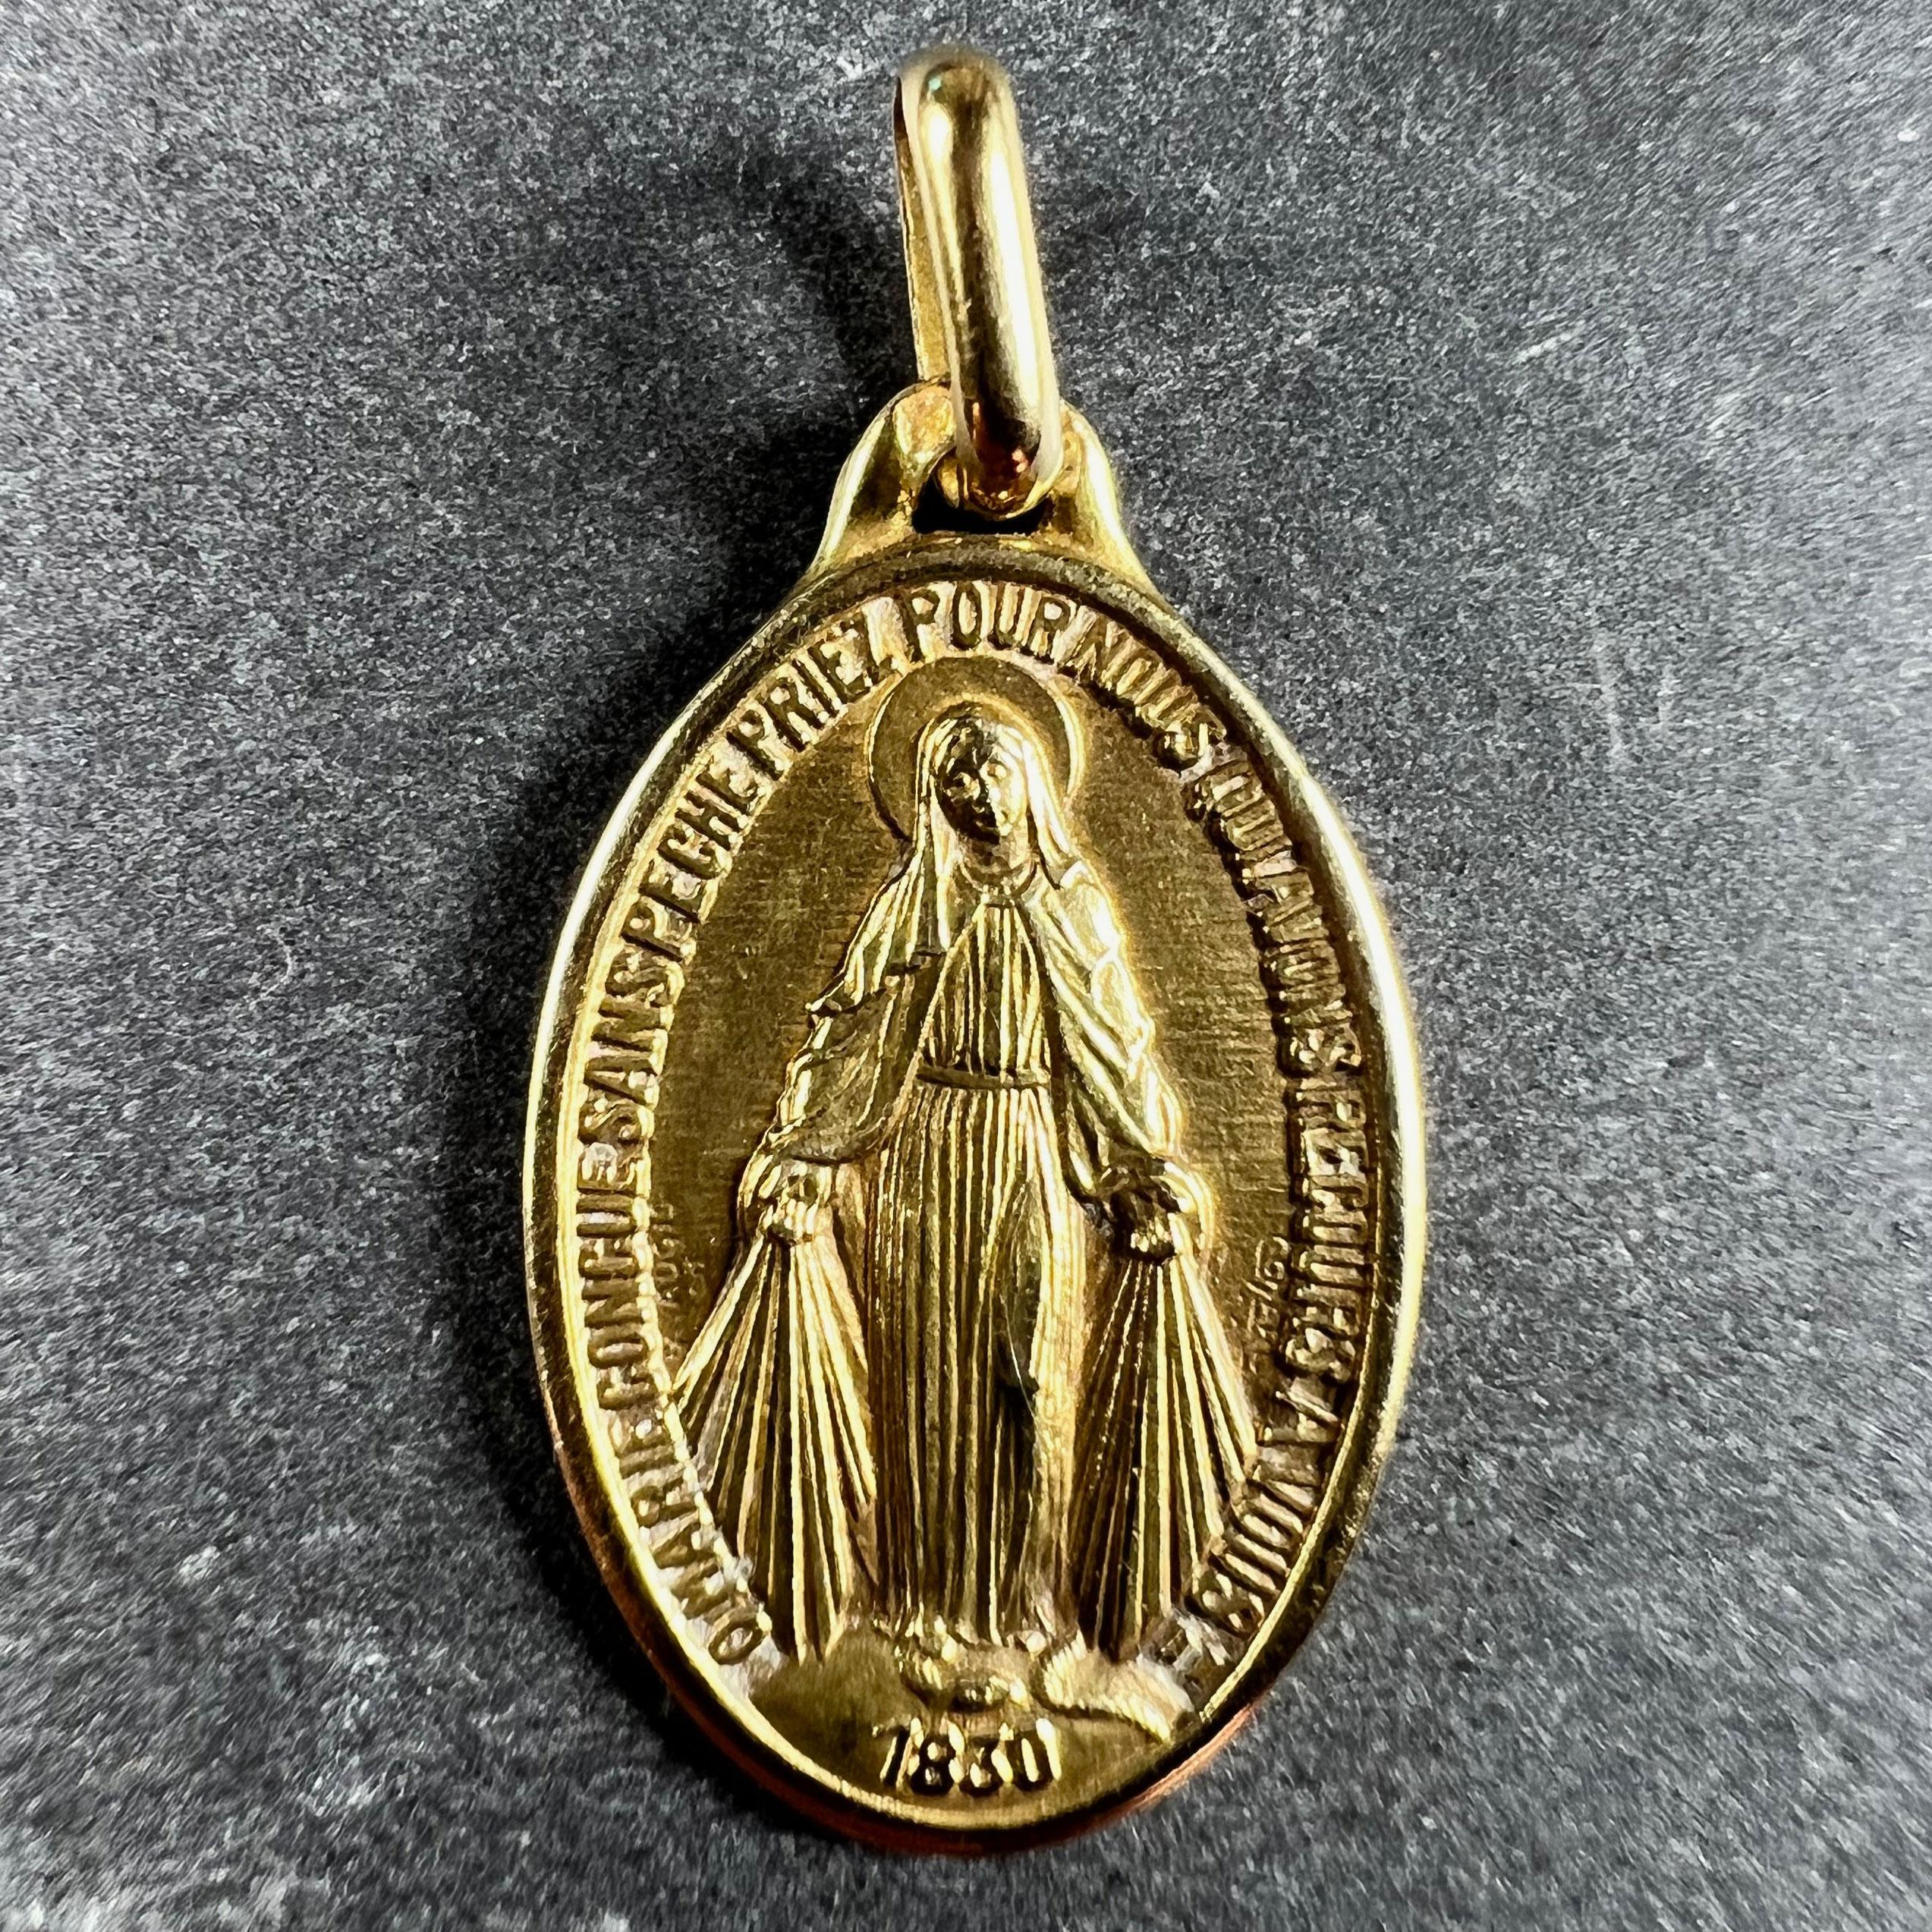 A French 18 karat (18K) yellow gold charm pendant designed as the Miraculous Medal by Augis. The medal depicts the Virgin Mary standing on a globe above the date 1830, crushing a serpent beneath her feet with rays shooting from her hands to